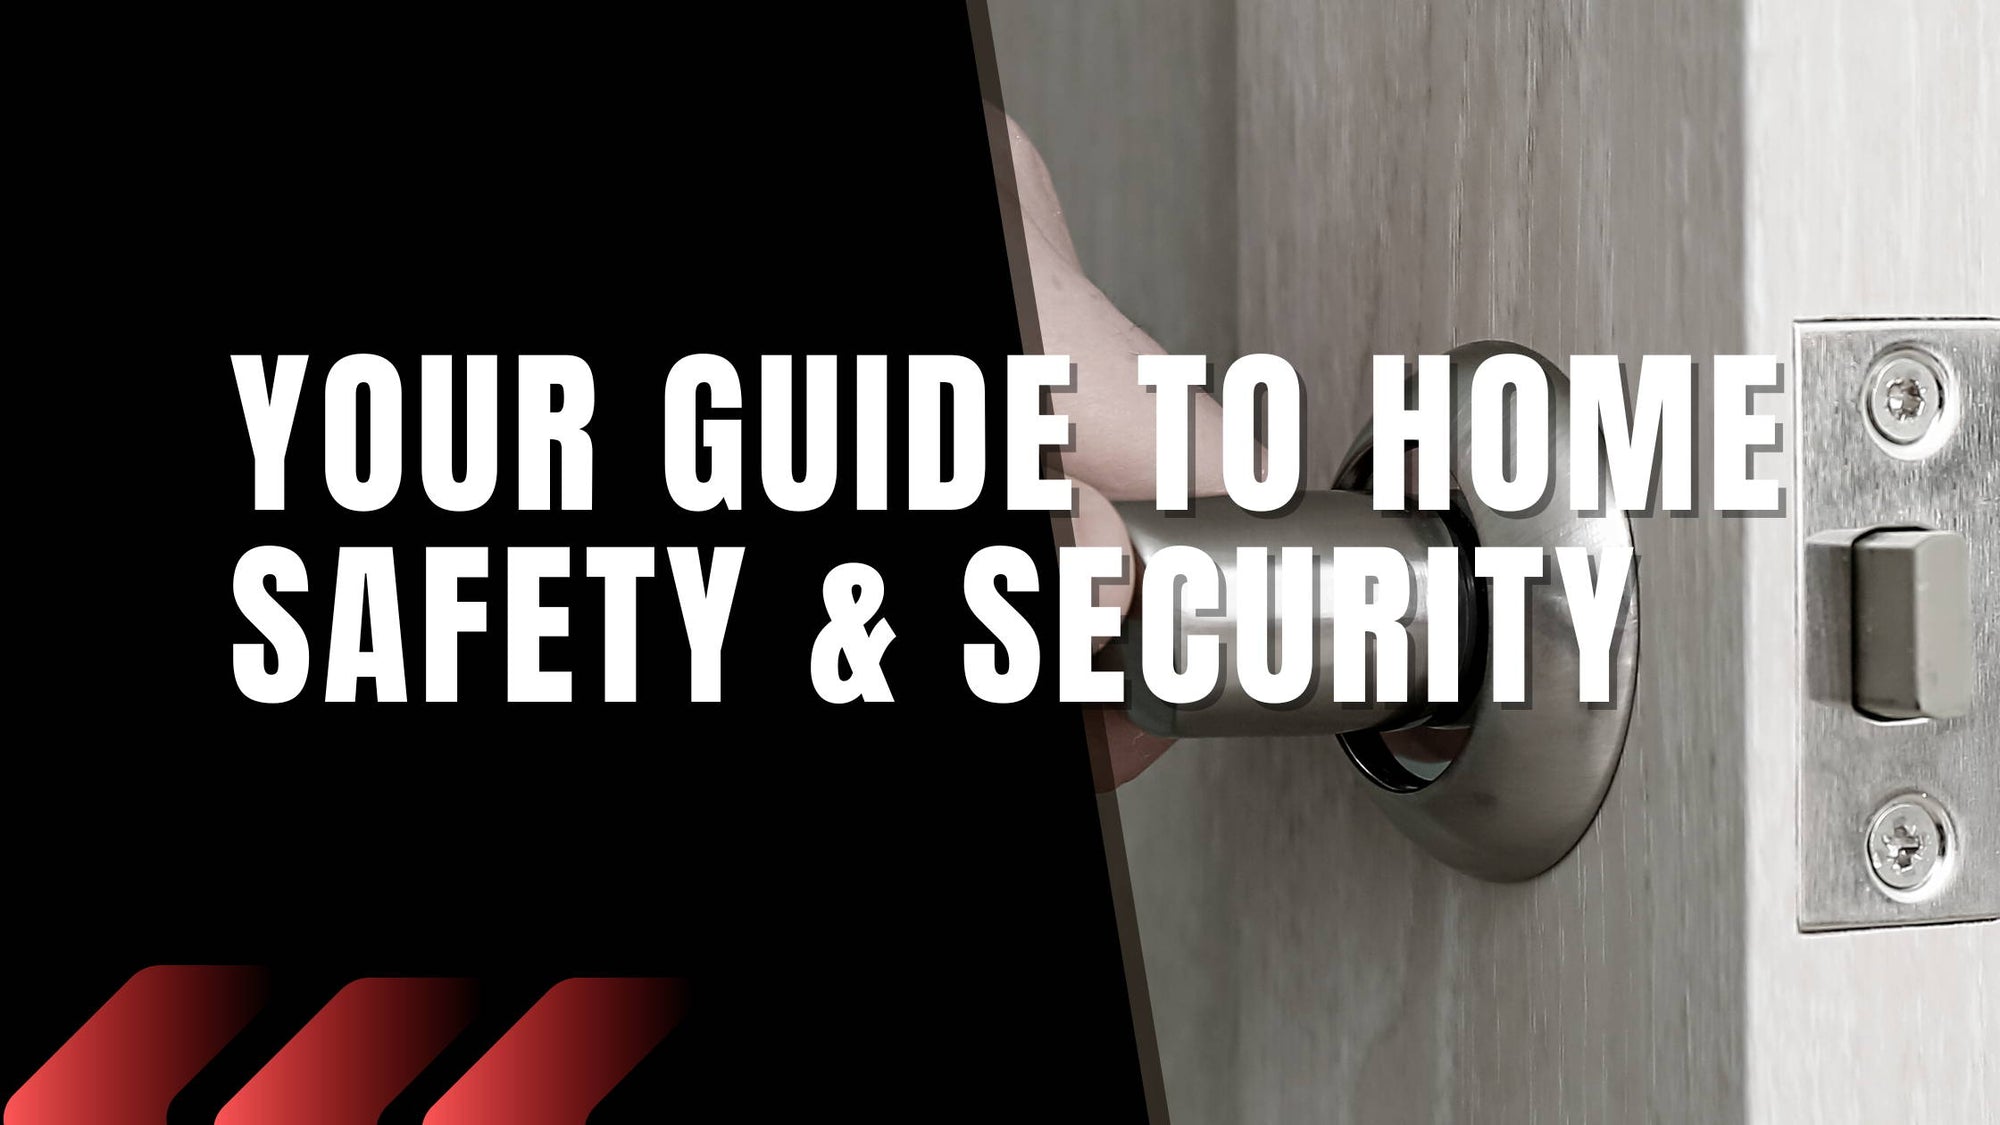 Your Guide to Home Safety & Security